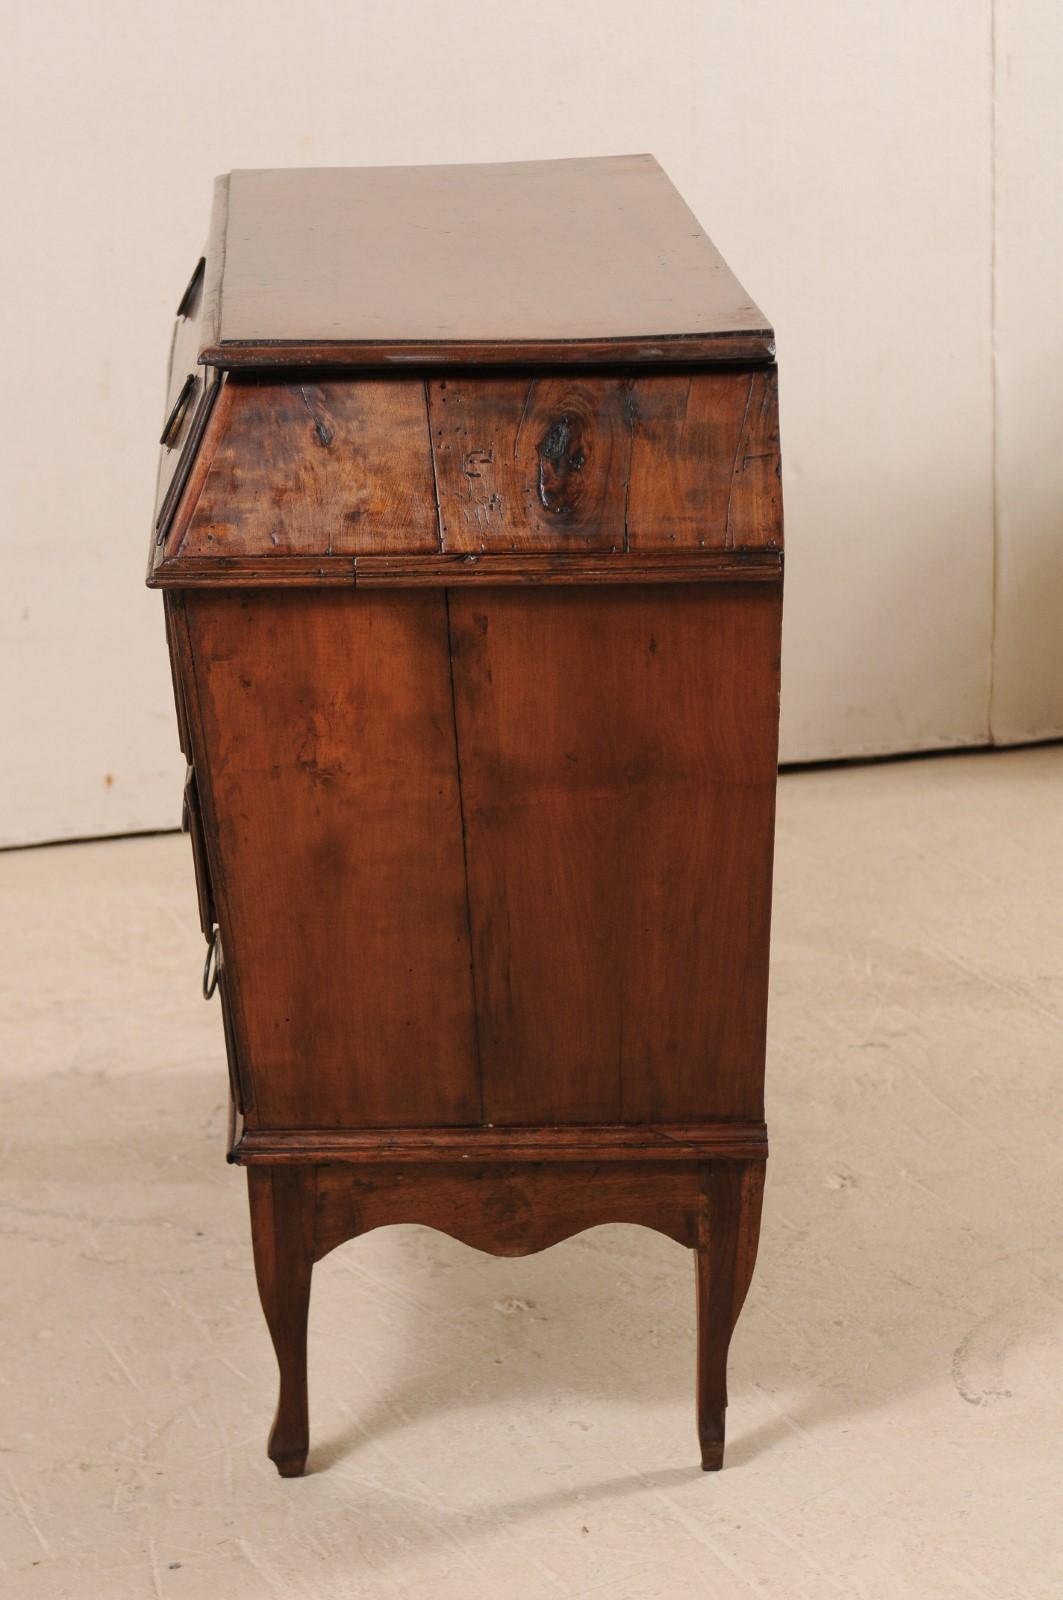 An Exceptional Late 18th C. Italian Walnut Commode w/ Unique Triangulated Shape For Sale 2